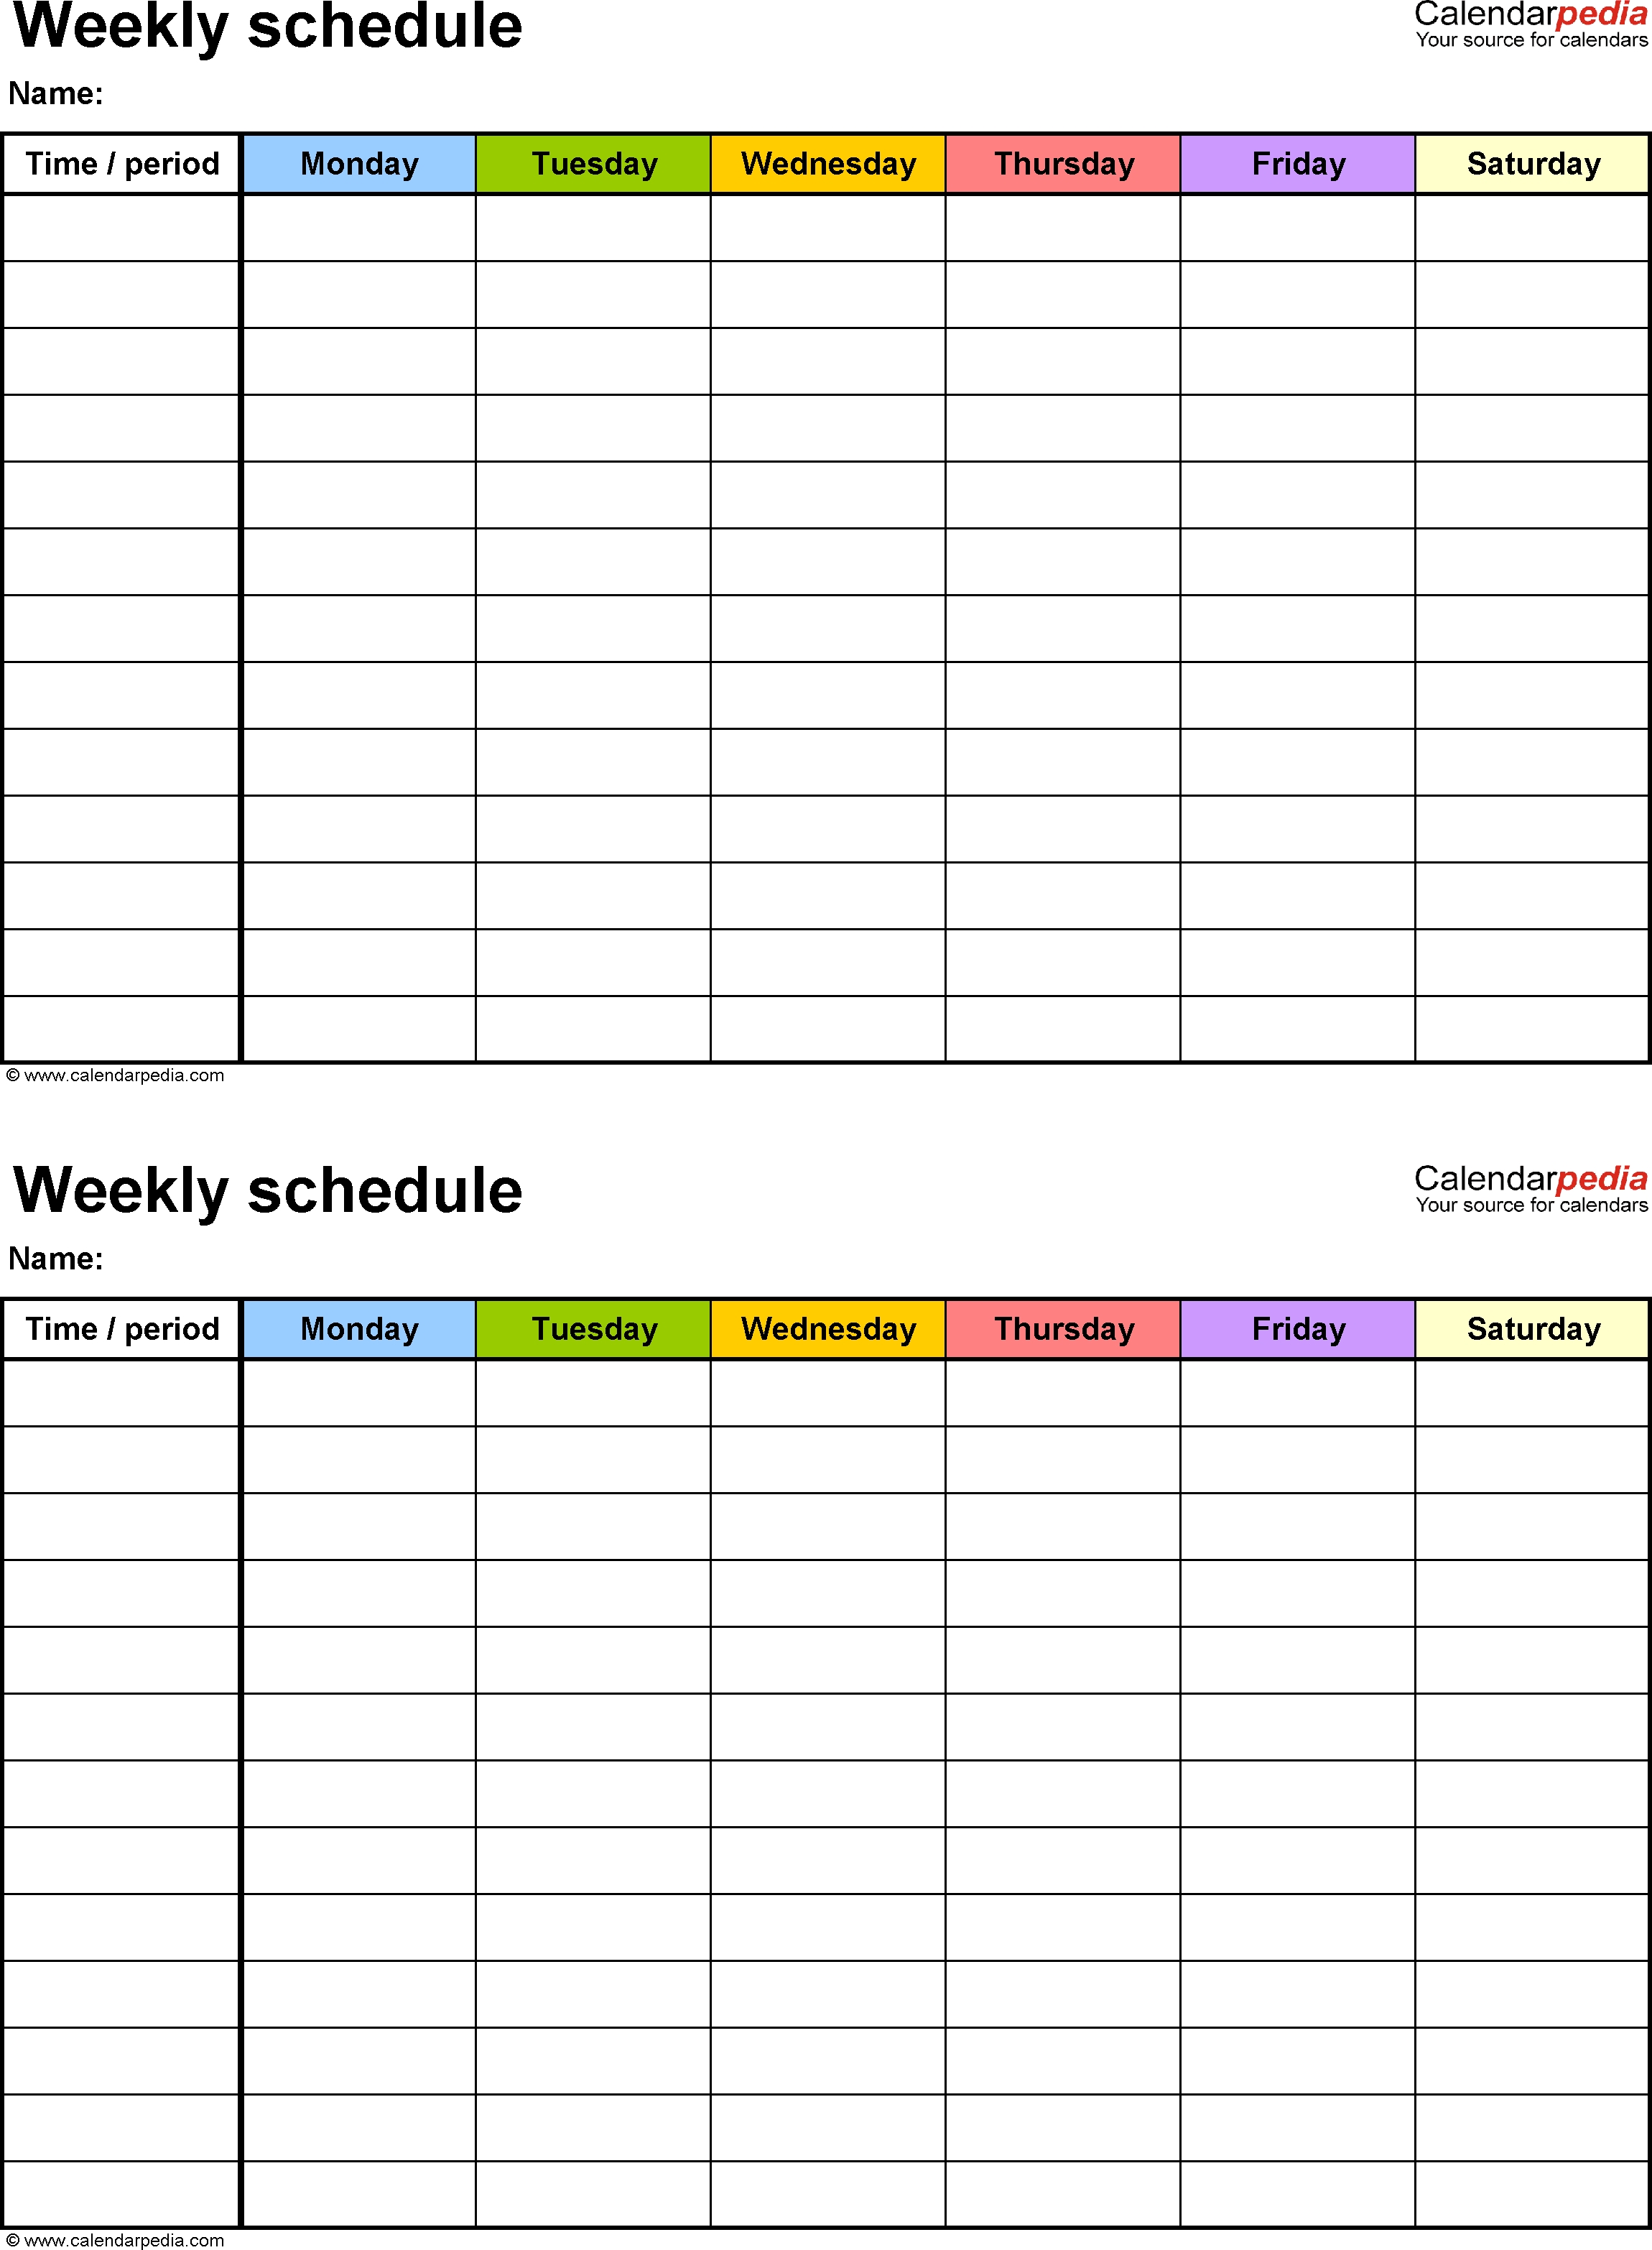 Free Weekly Schedule Templates For Pdf - 18 Templates with Single Week Planner Page Monday-Friday